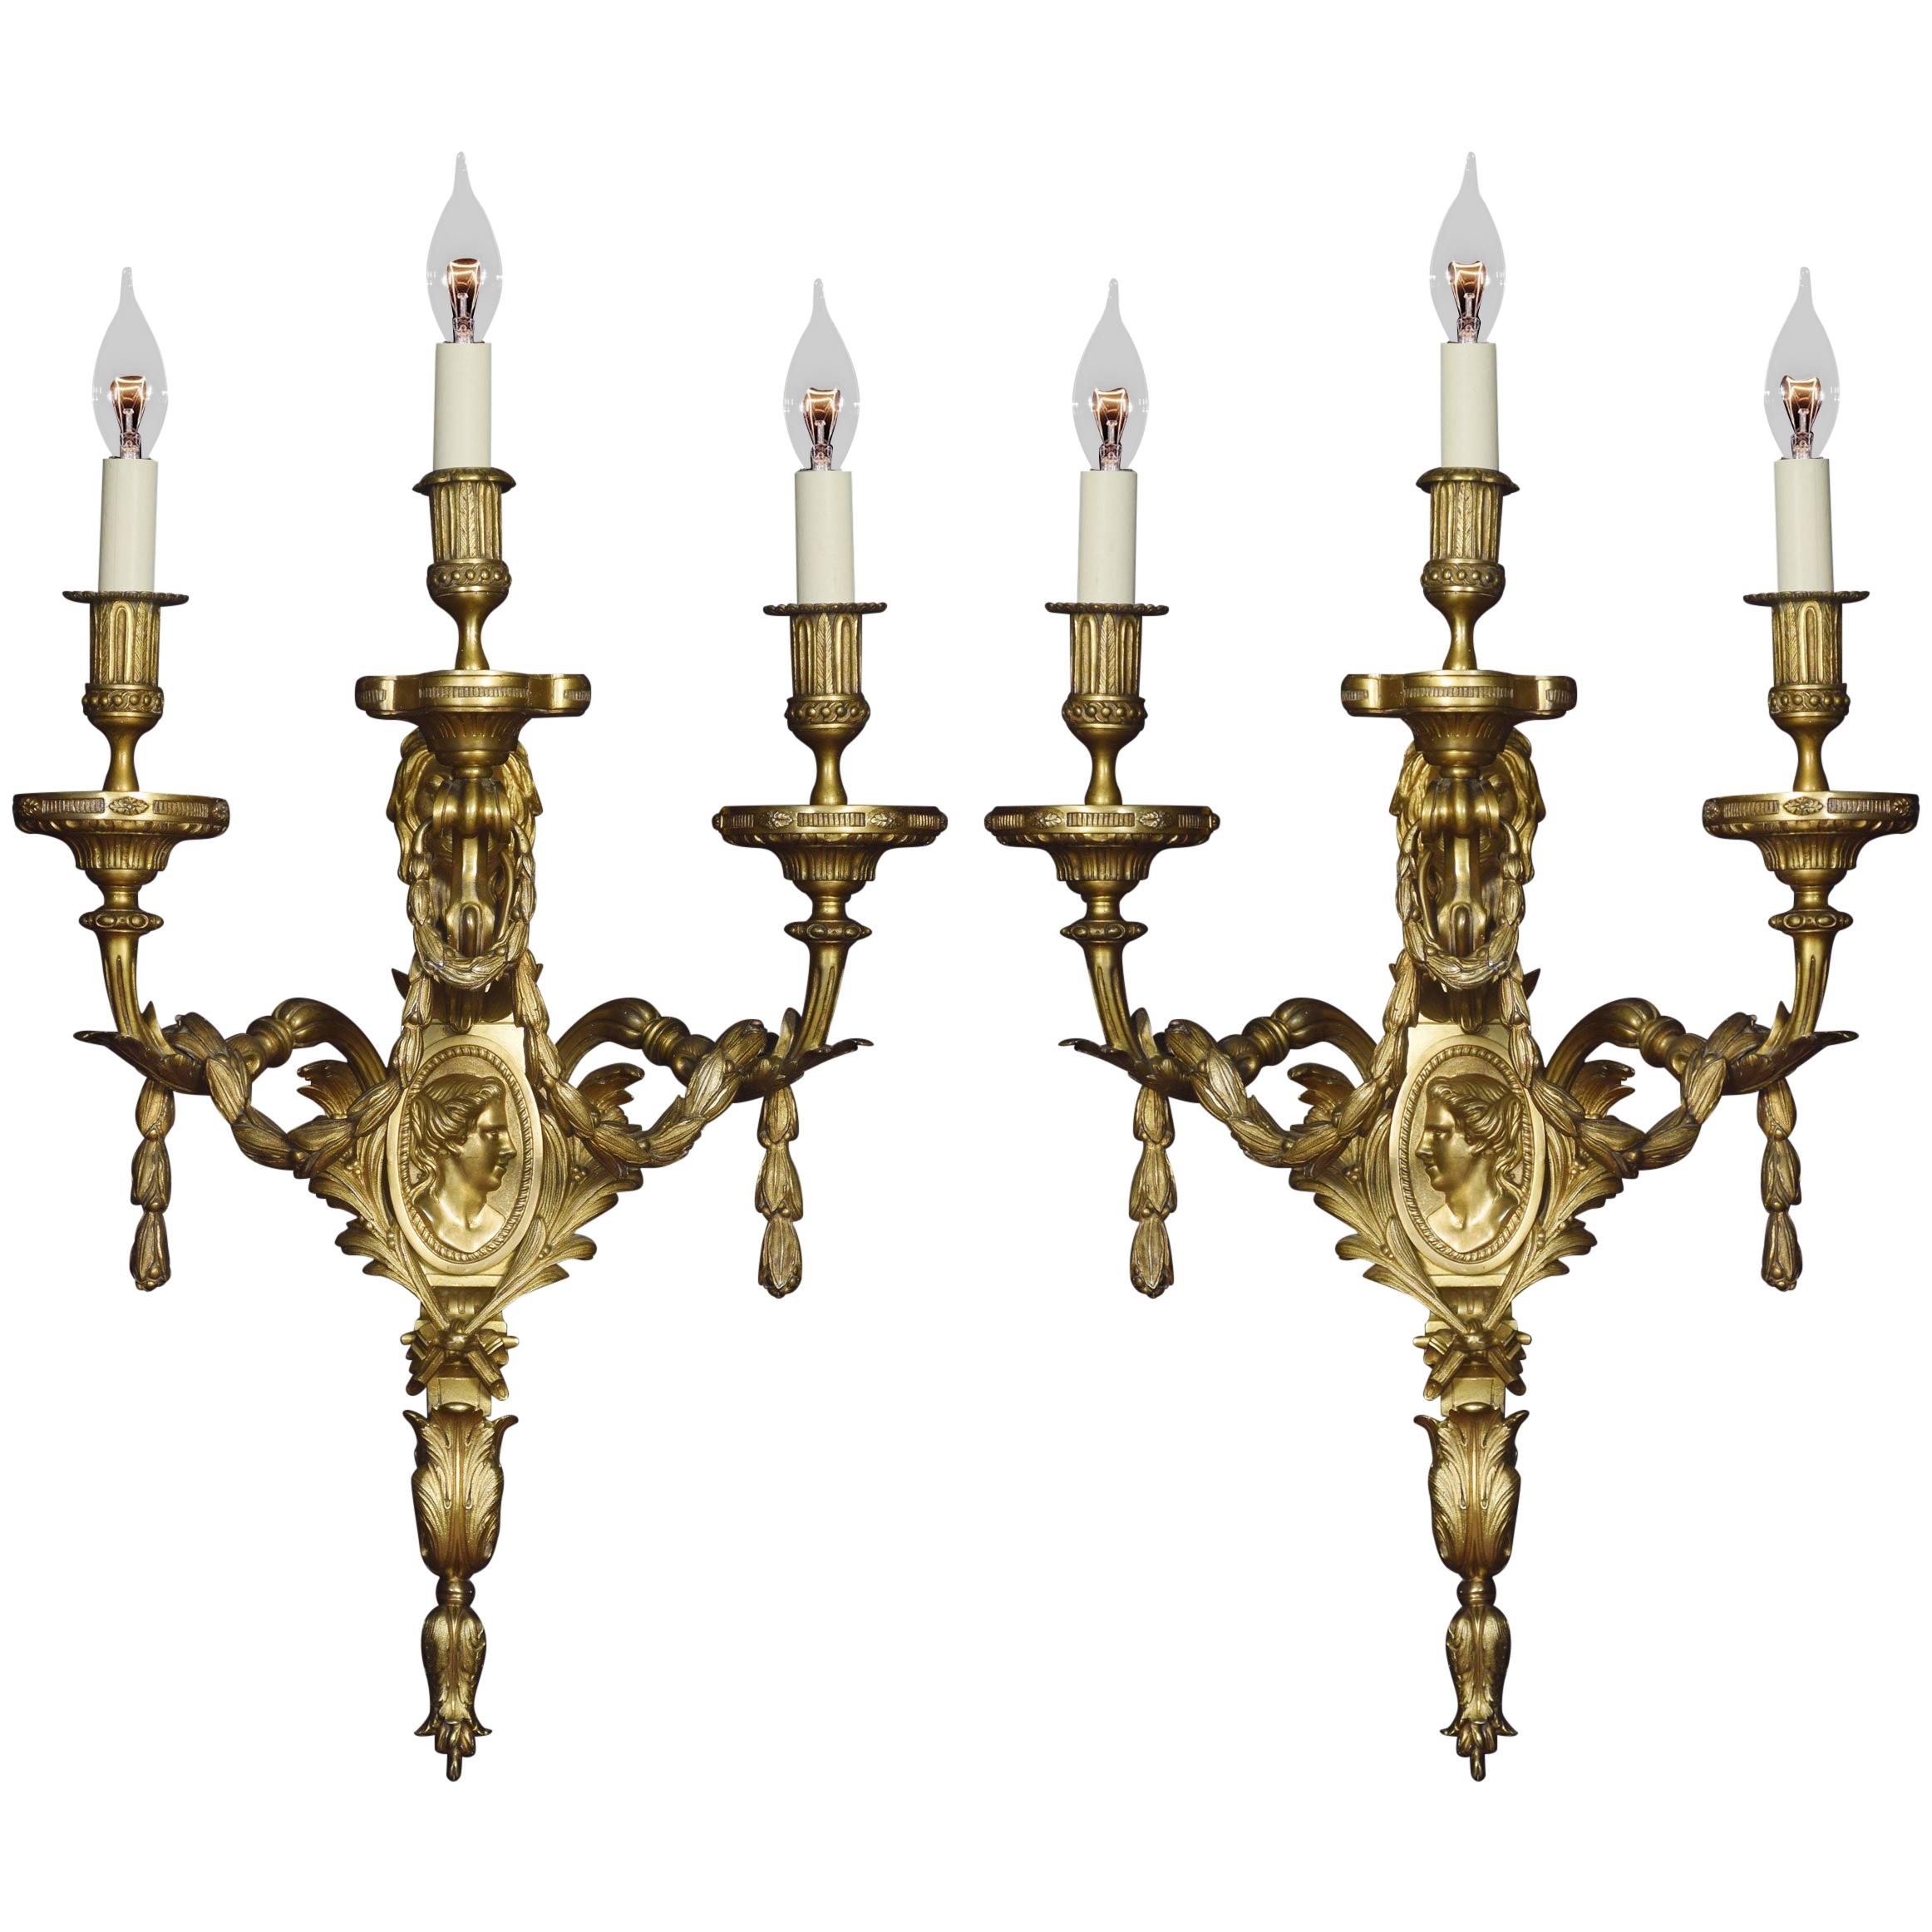 Large and Impressive Pair of Louis XVI Style Three-Branch Wall Lights